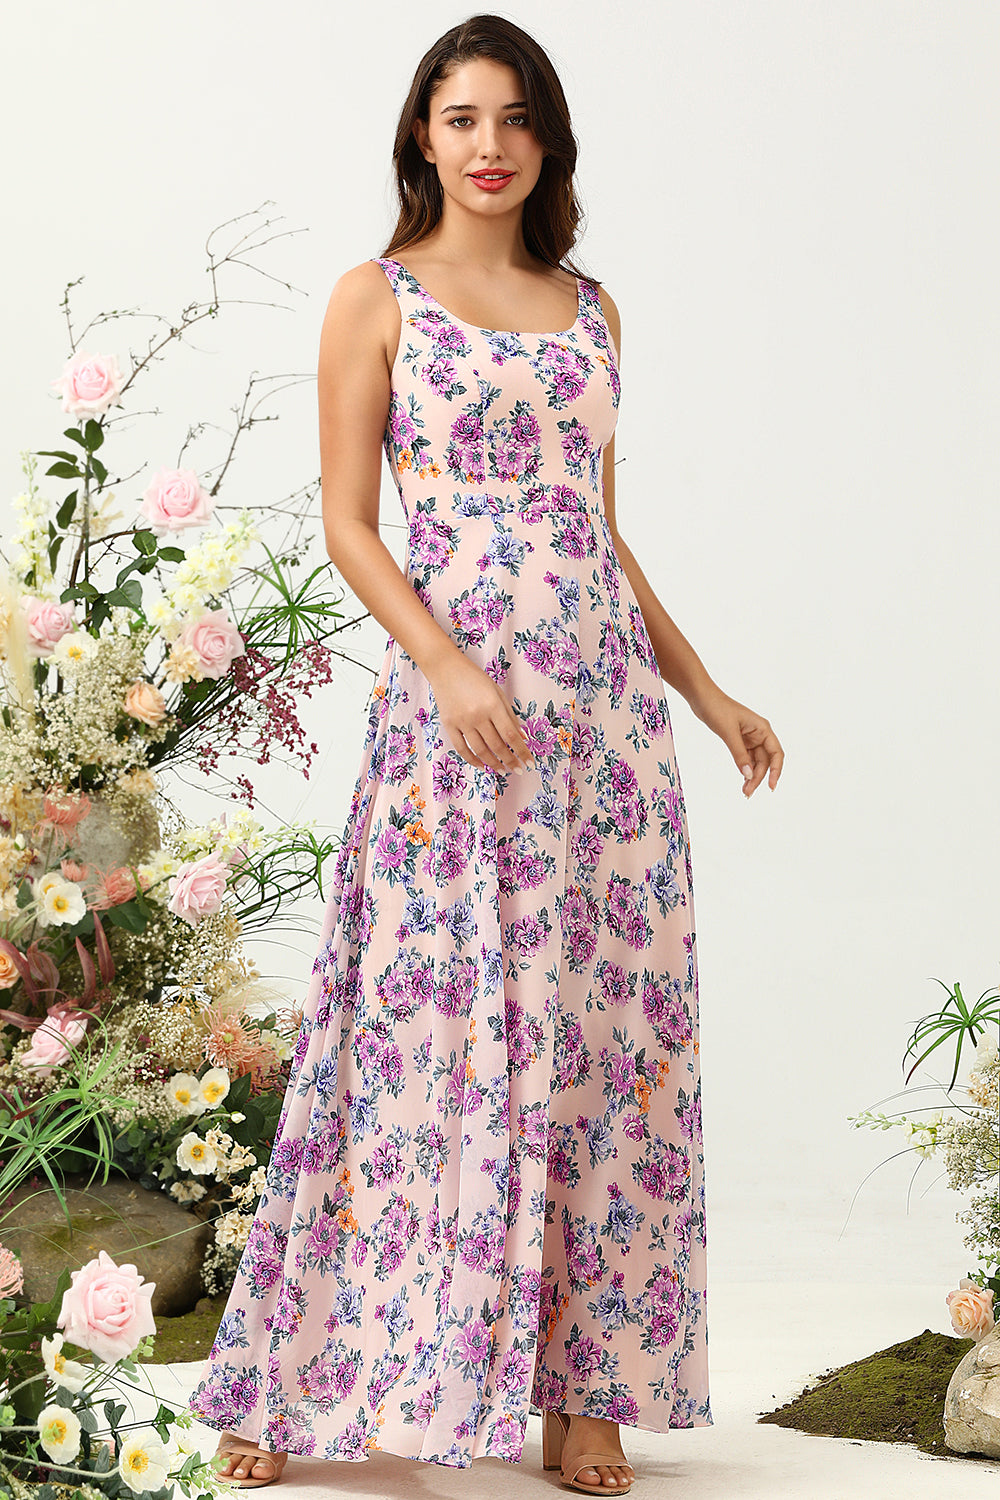 Pink A Line Square Neck Floral Printed Chiffon Wedding Party Dress with Open Back